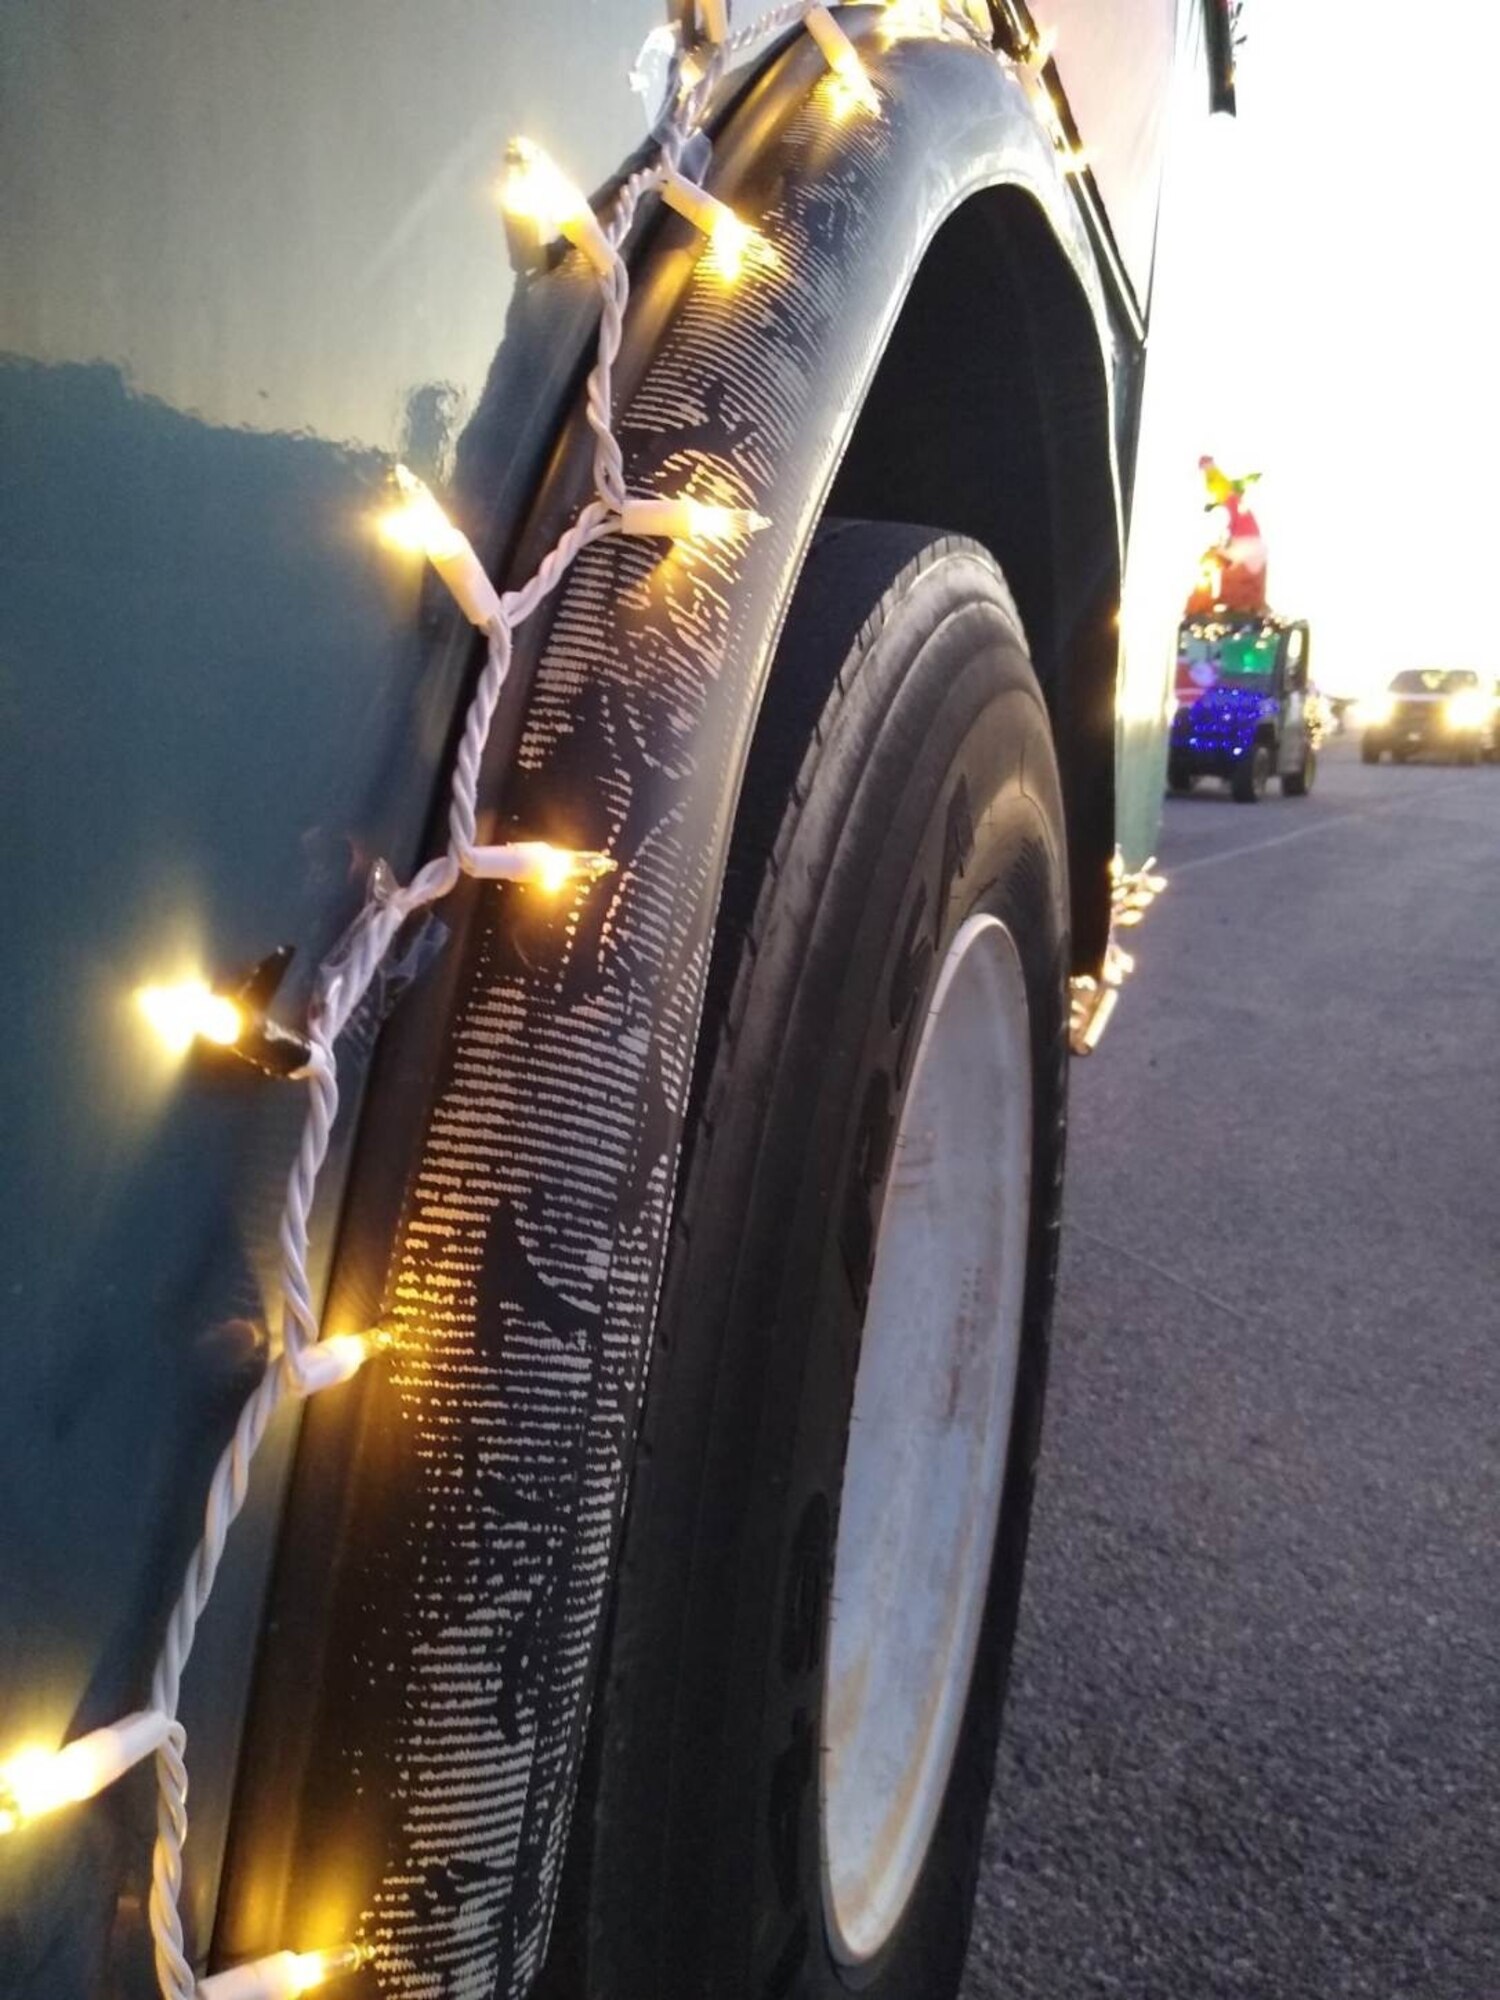 Lights are shown on the wheel of a truck during a Christmas Parade at Altus Air Force Base, Oklahoma, Dec. 13, 2022. Nineteen vehicles were decorated to participate in the parade. (Courtesy photo by Christine Brindle)